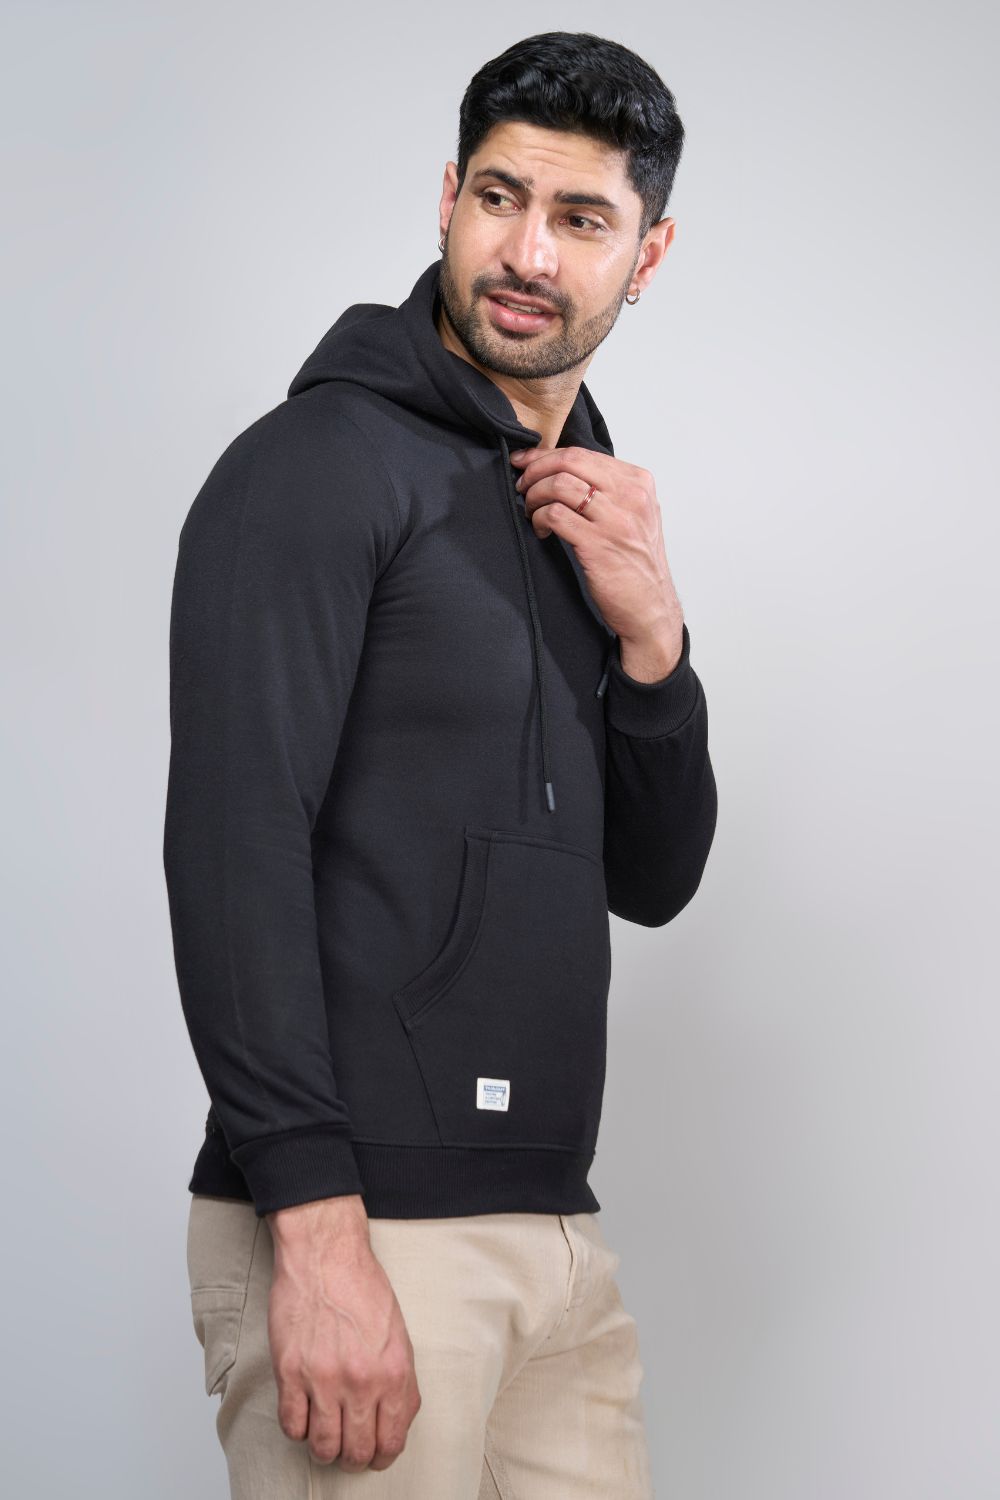 Black colored, hoodie for men with full sleeves and relaxed fit, Pocket view.